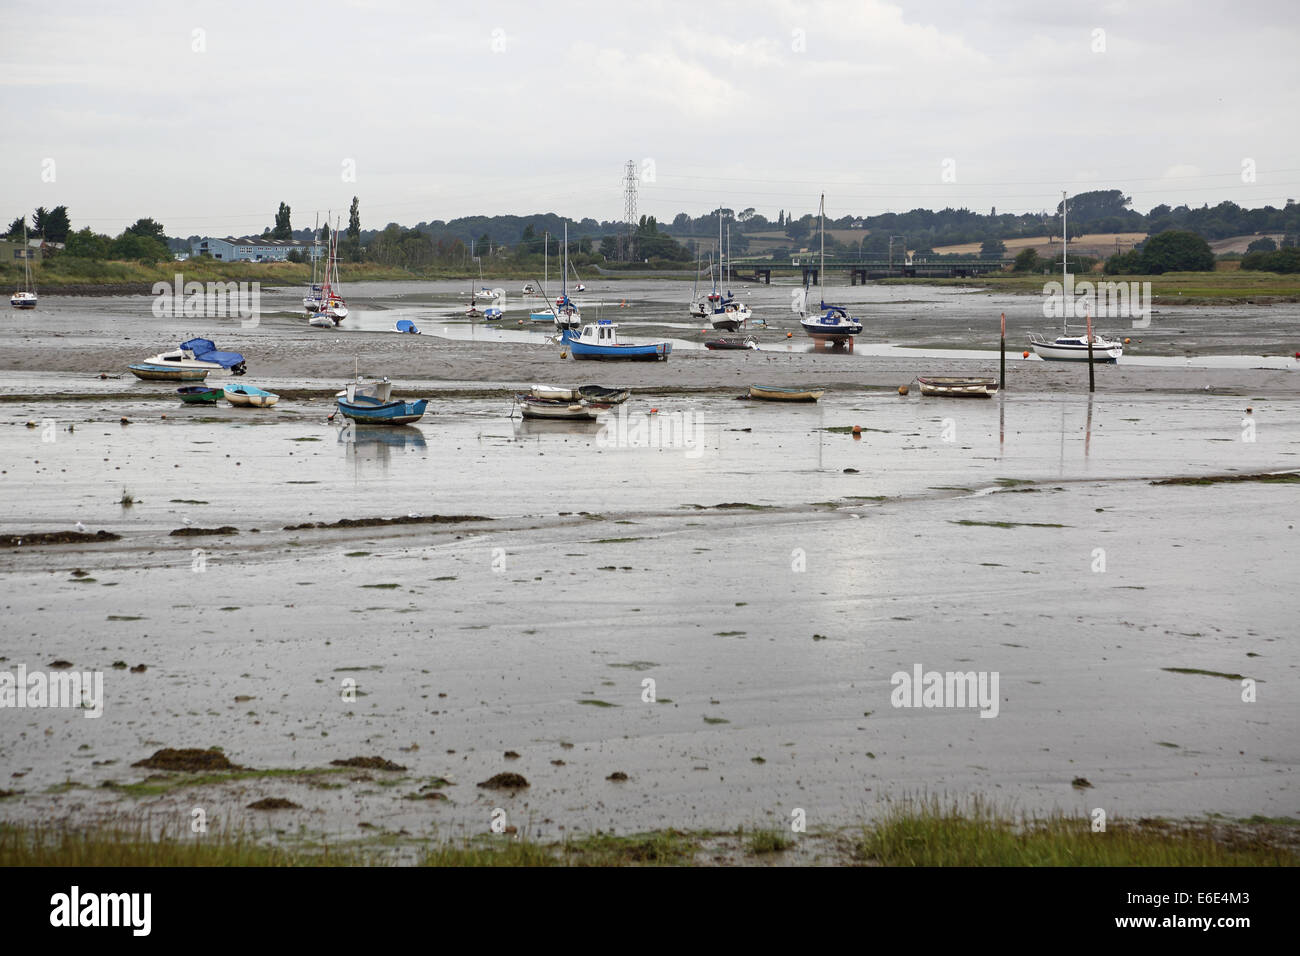 The River Stour estuary, Essex, UK, at low tide showing mud flats and moored yachts. Railway bridge in distance. Stock Photo